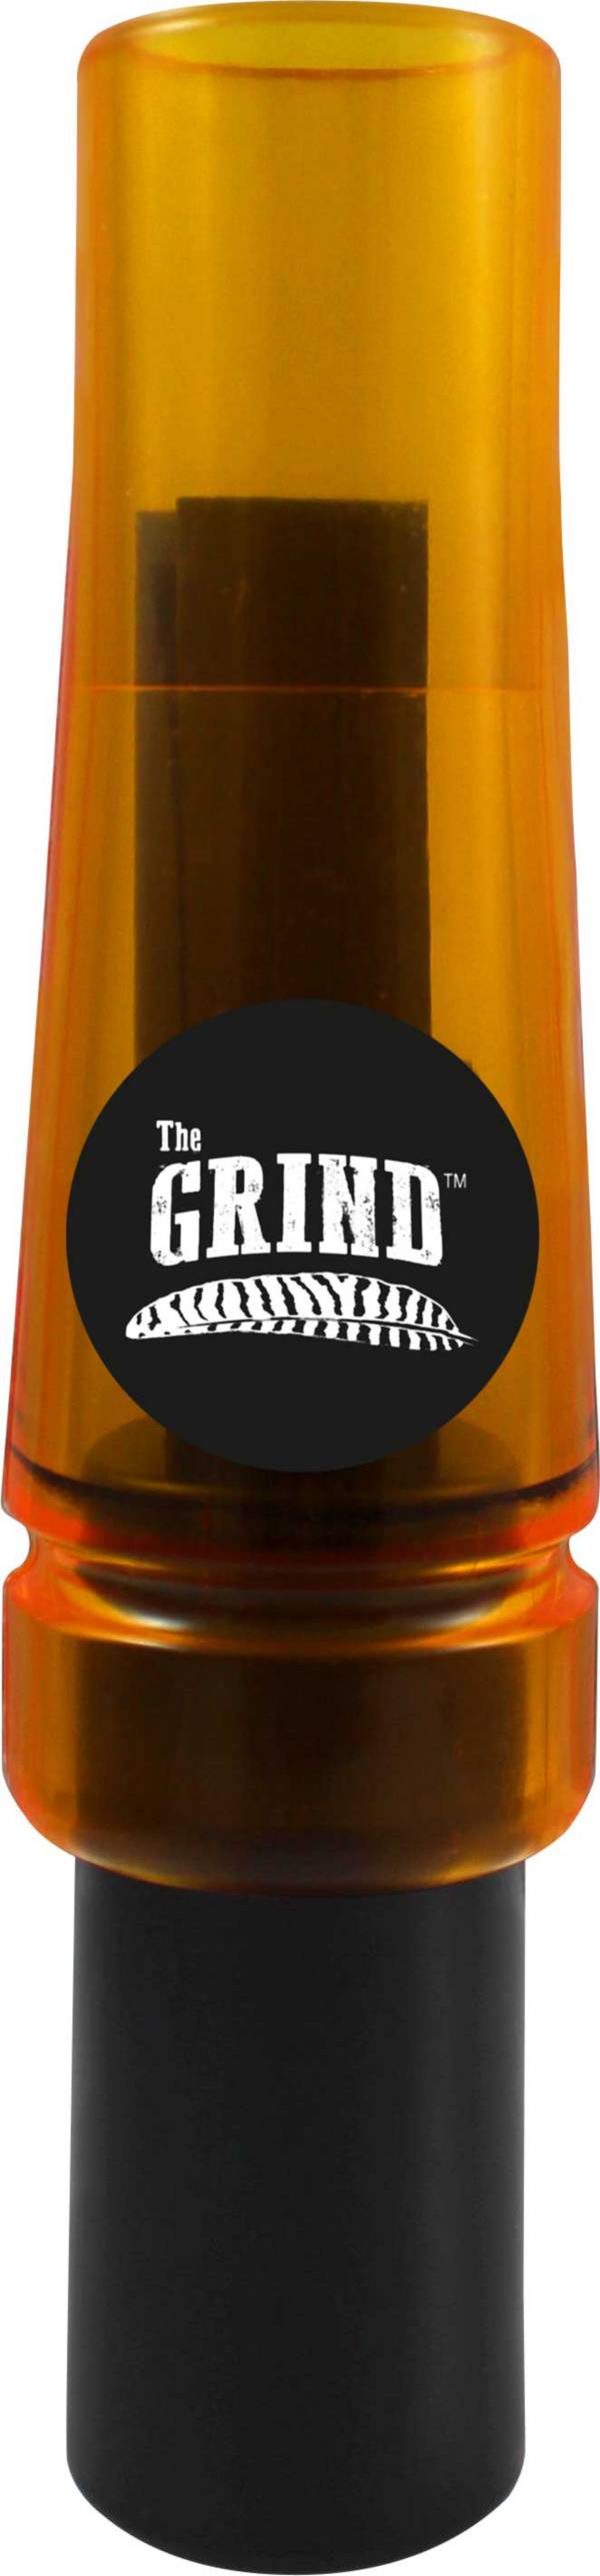 Wood & Plastic The Grind Turkey Locator Call Available in Crow & Owl Sounds 